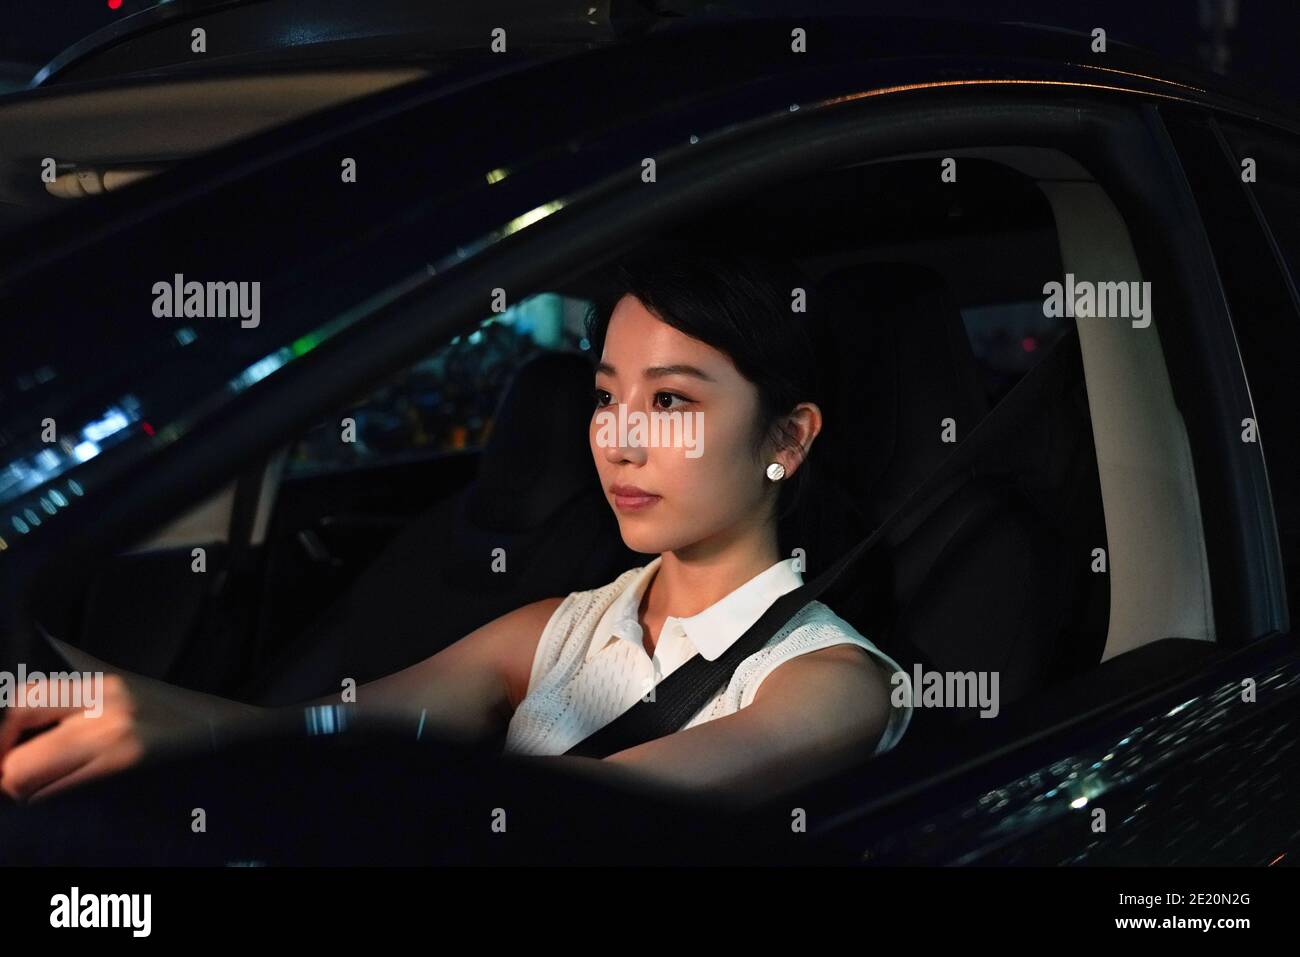 Driving a car at night young woman Stock Photo